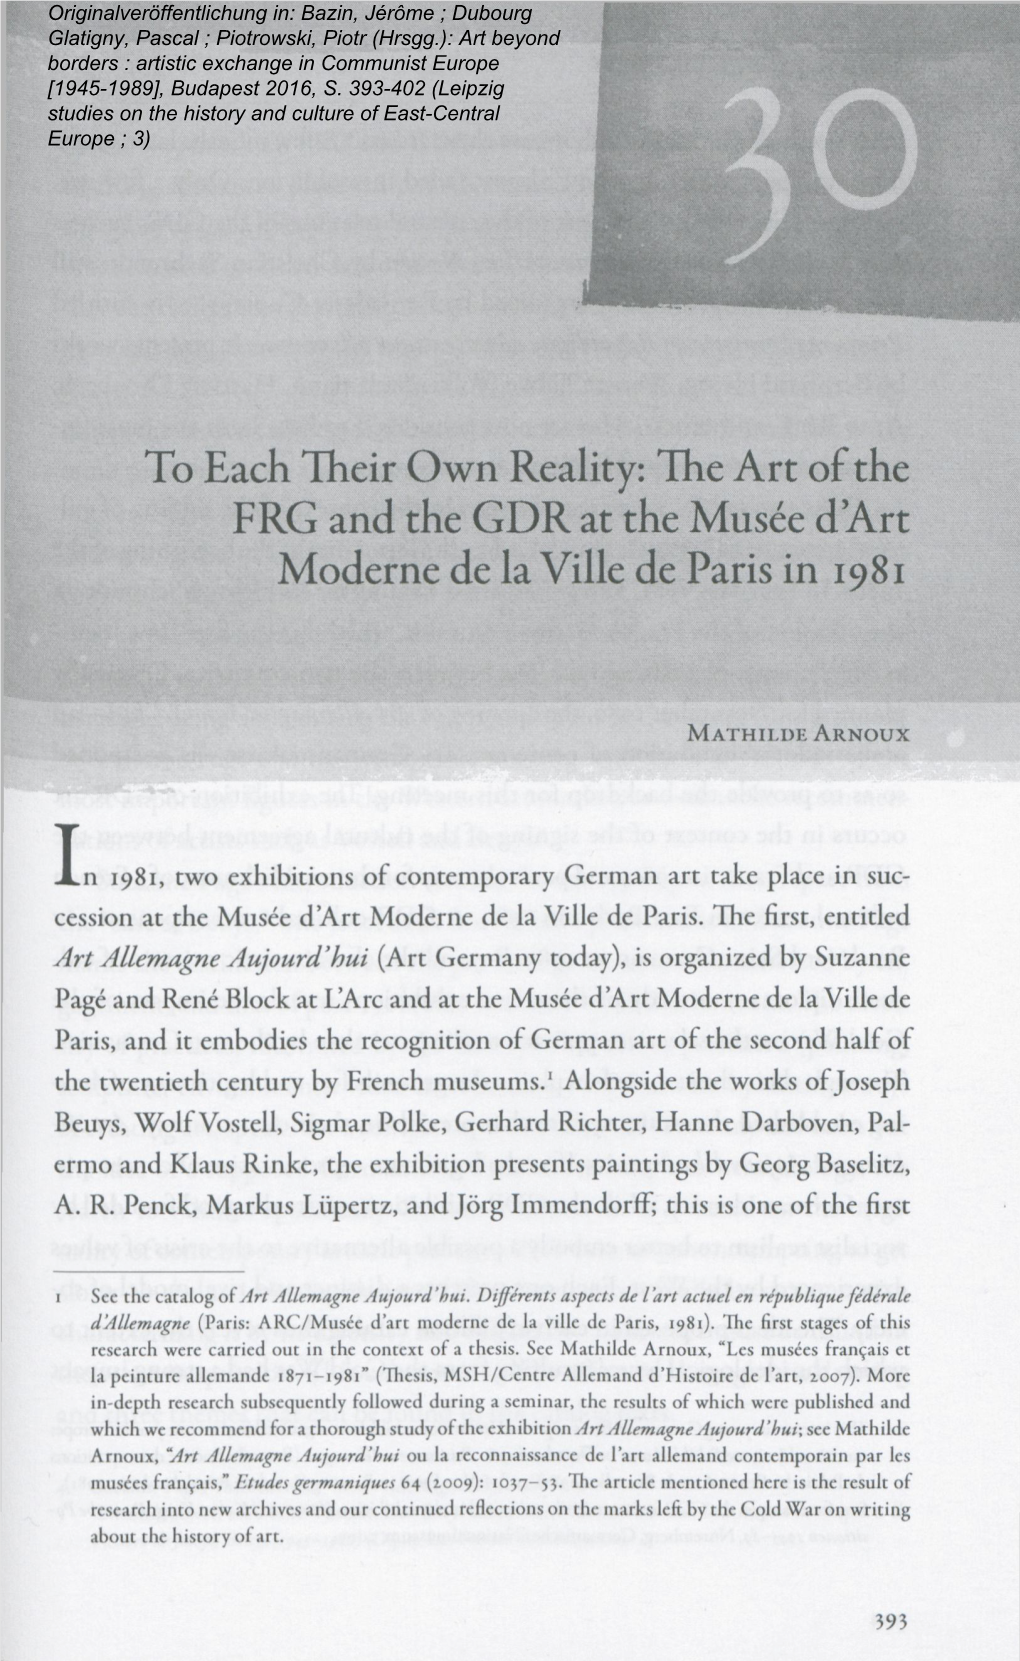 To Each Their Own Reality: the Art of the FRG and the GDR at the Musee D Art Moderne De La Ville De Paris in 1981